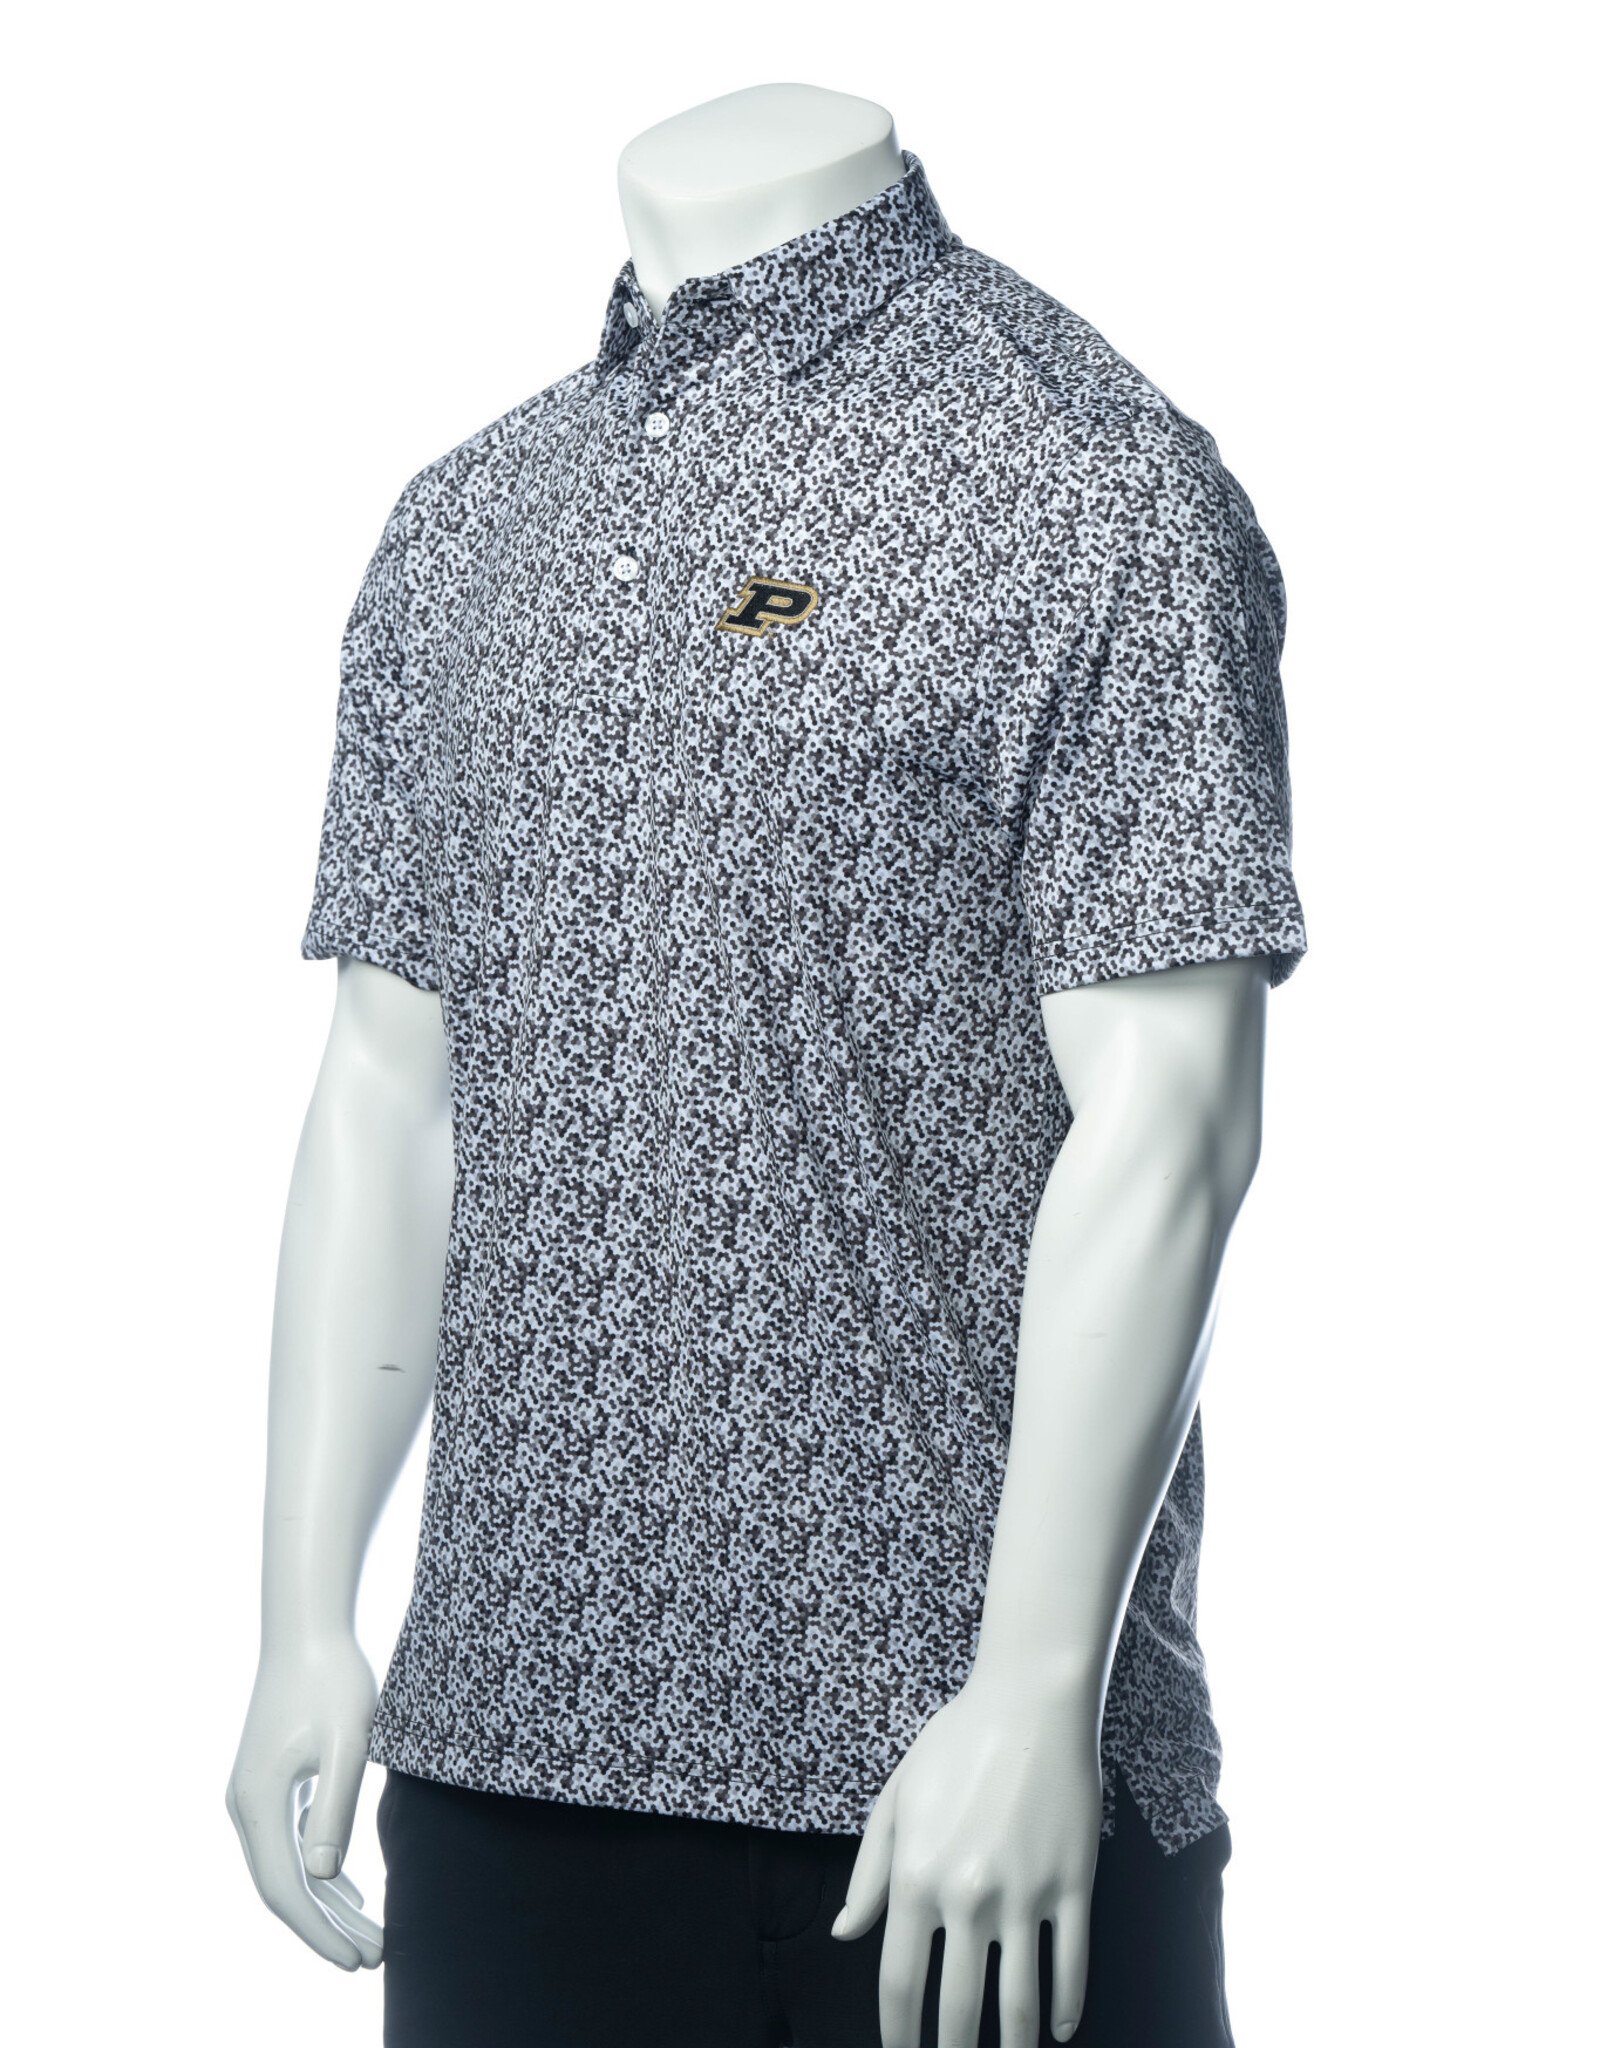 PURDUE COLLECTION PC "THE 4K" POLO